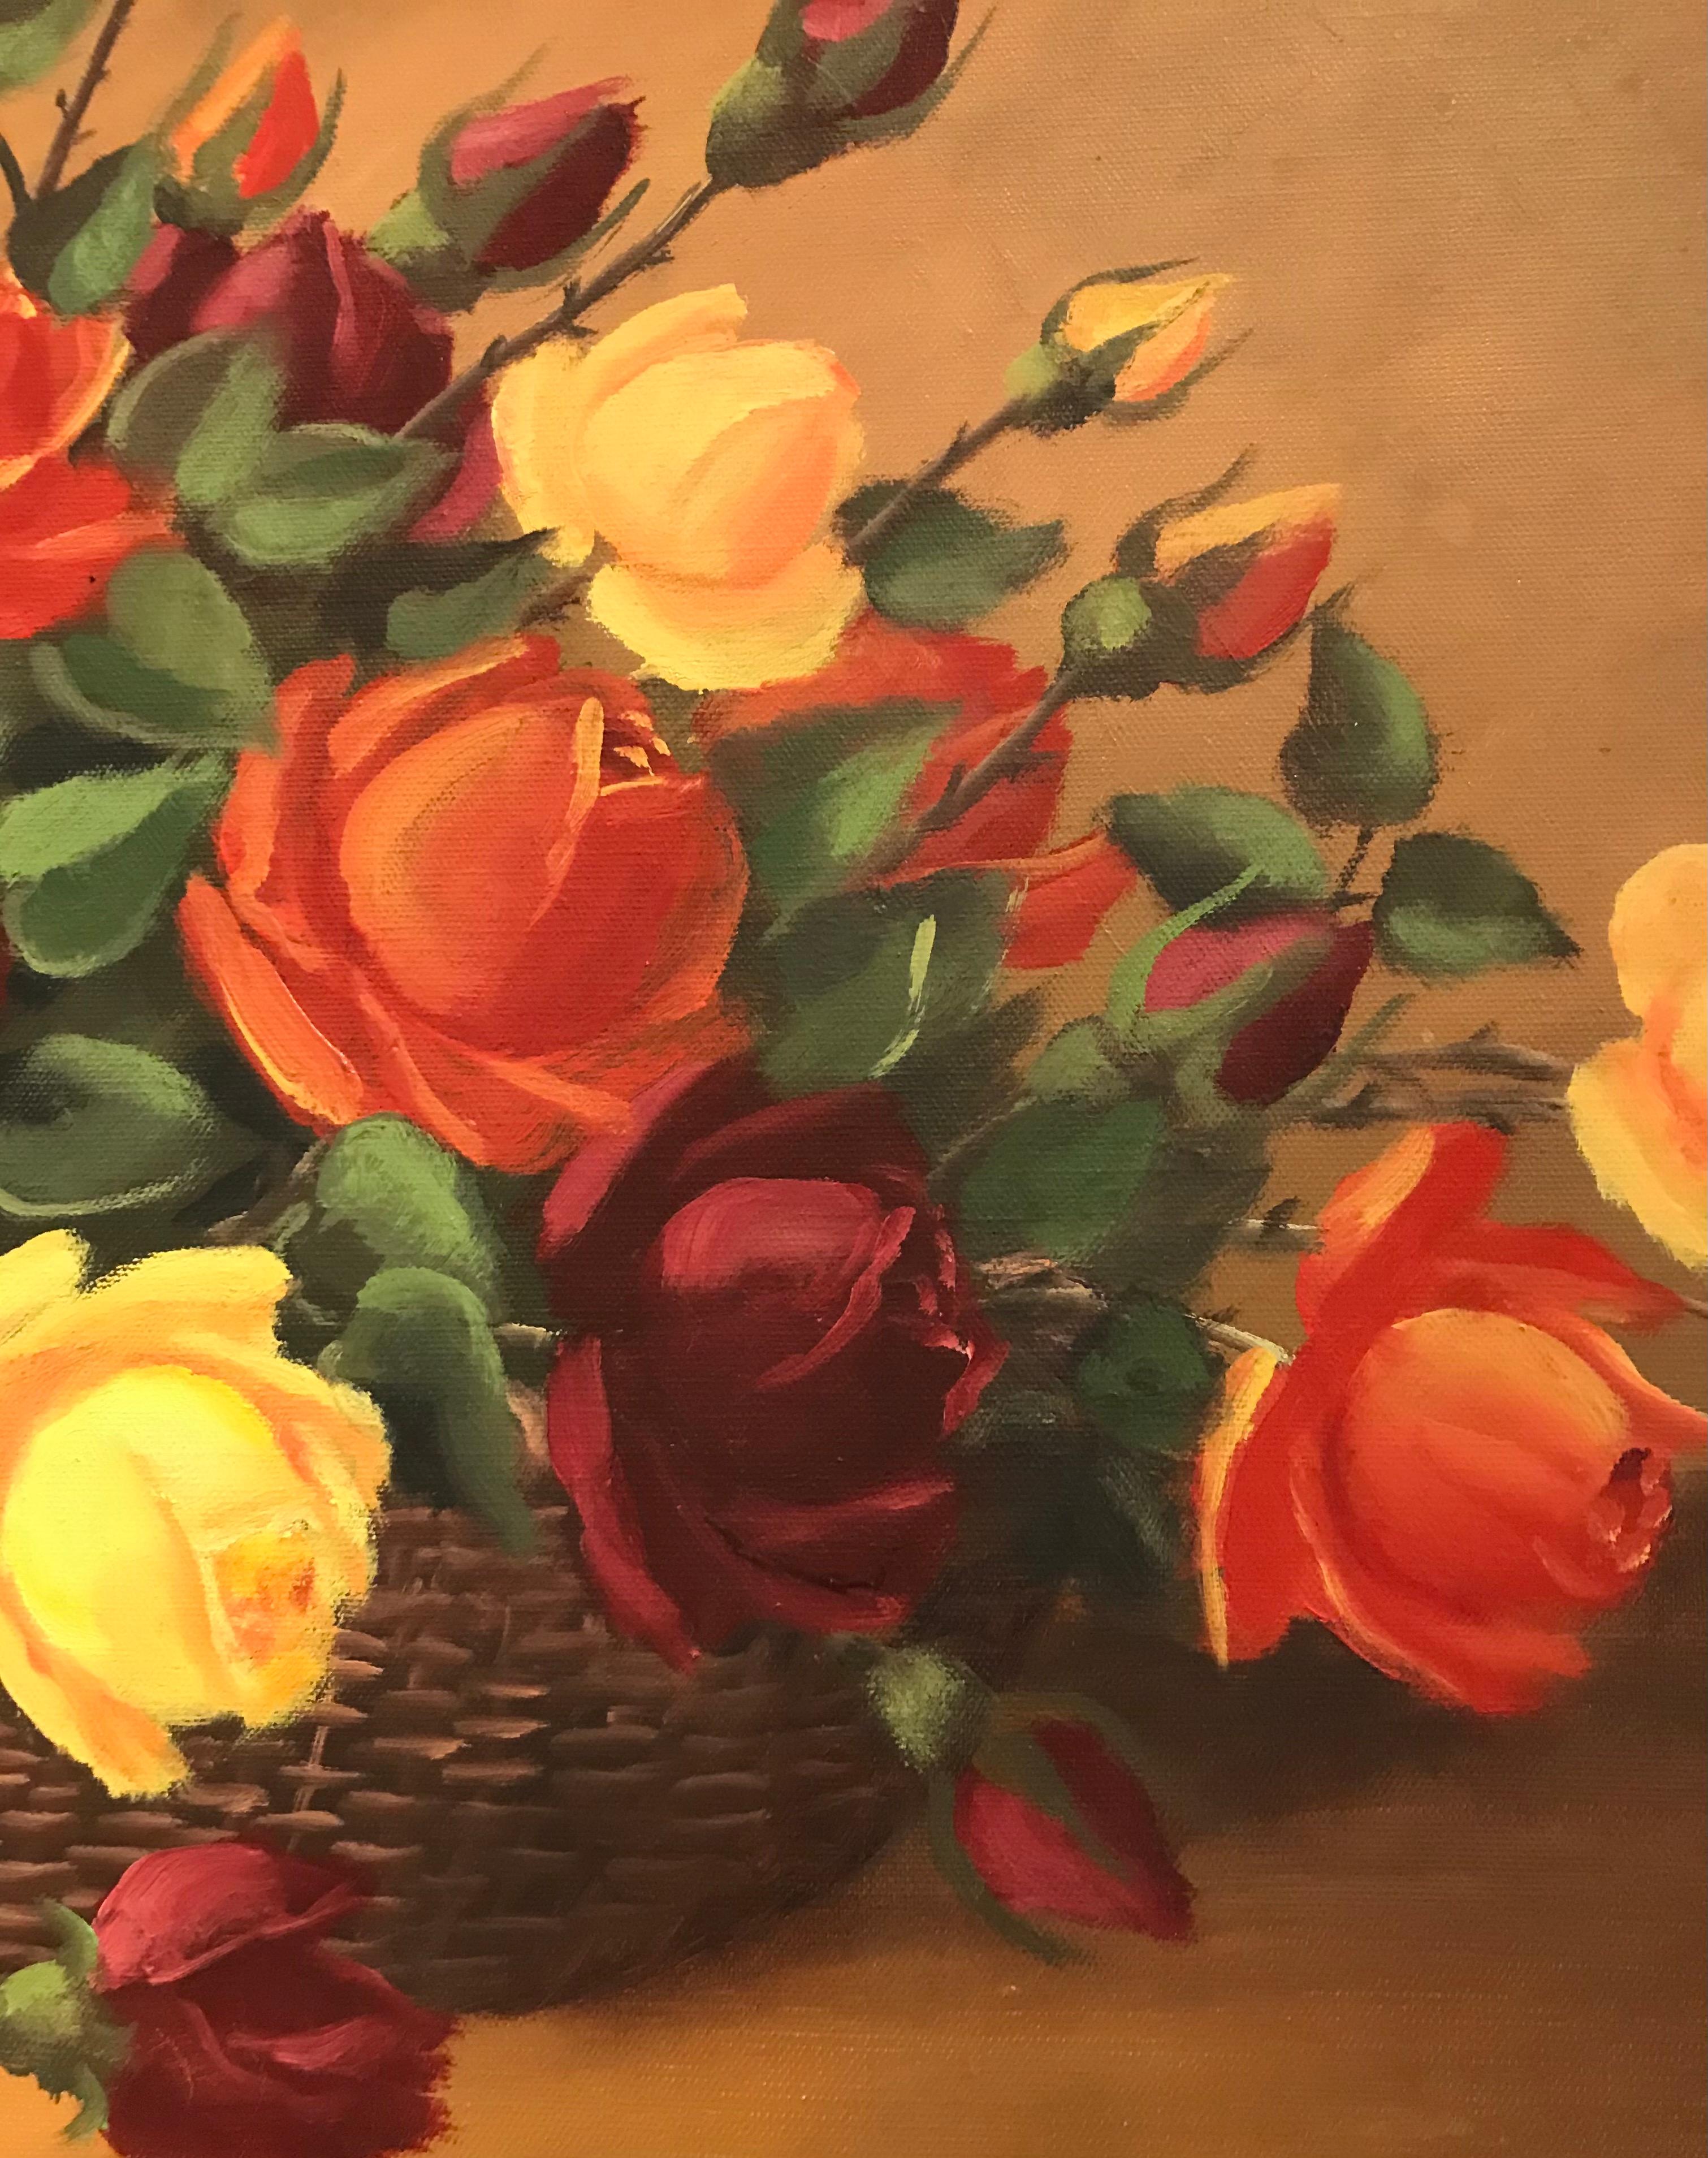 a basket of roses painting